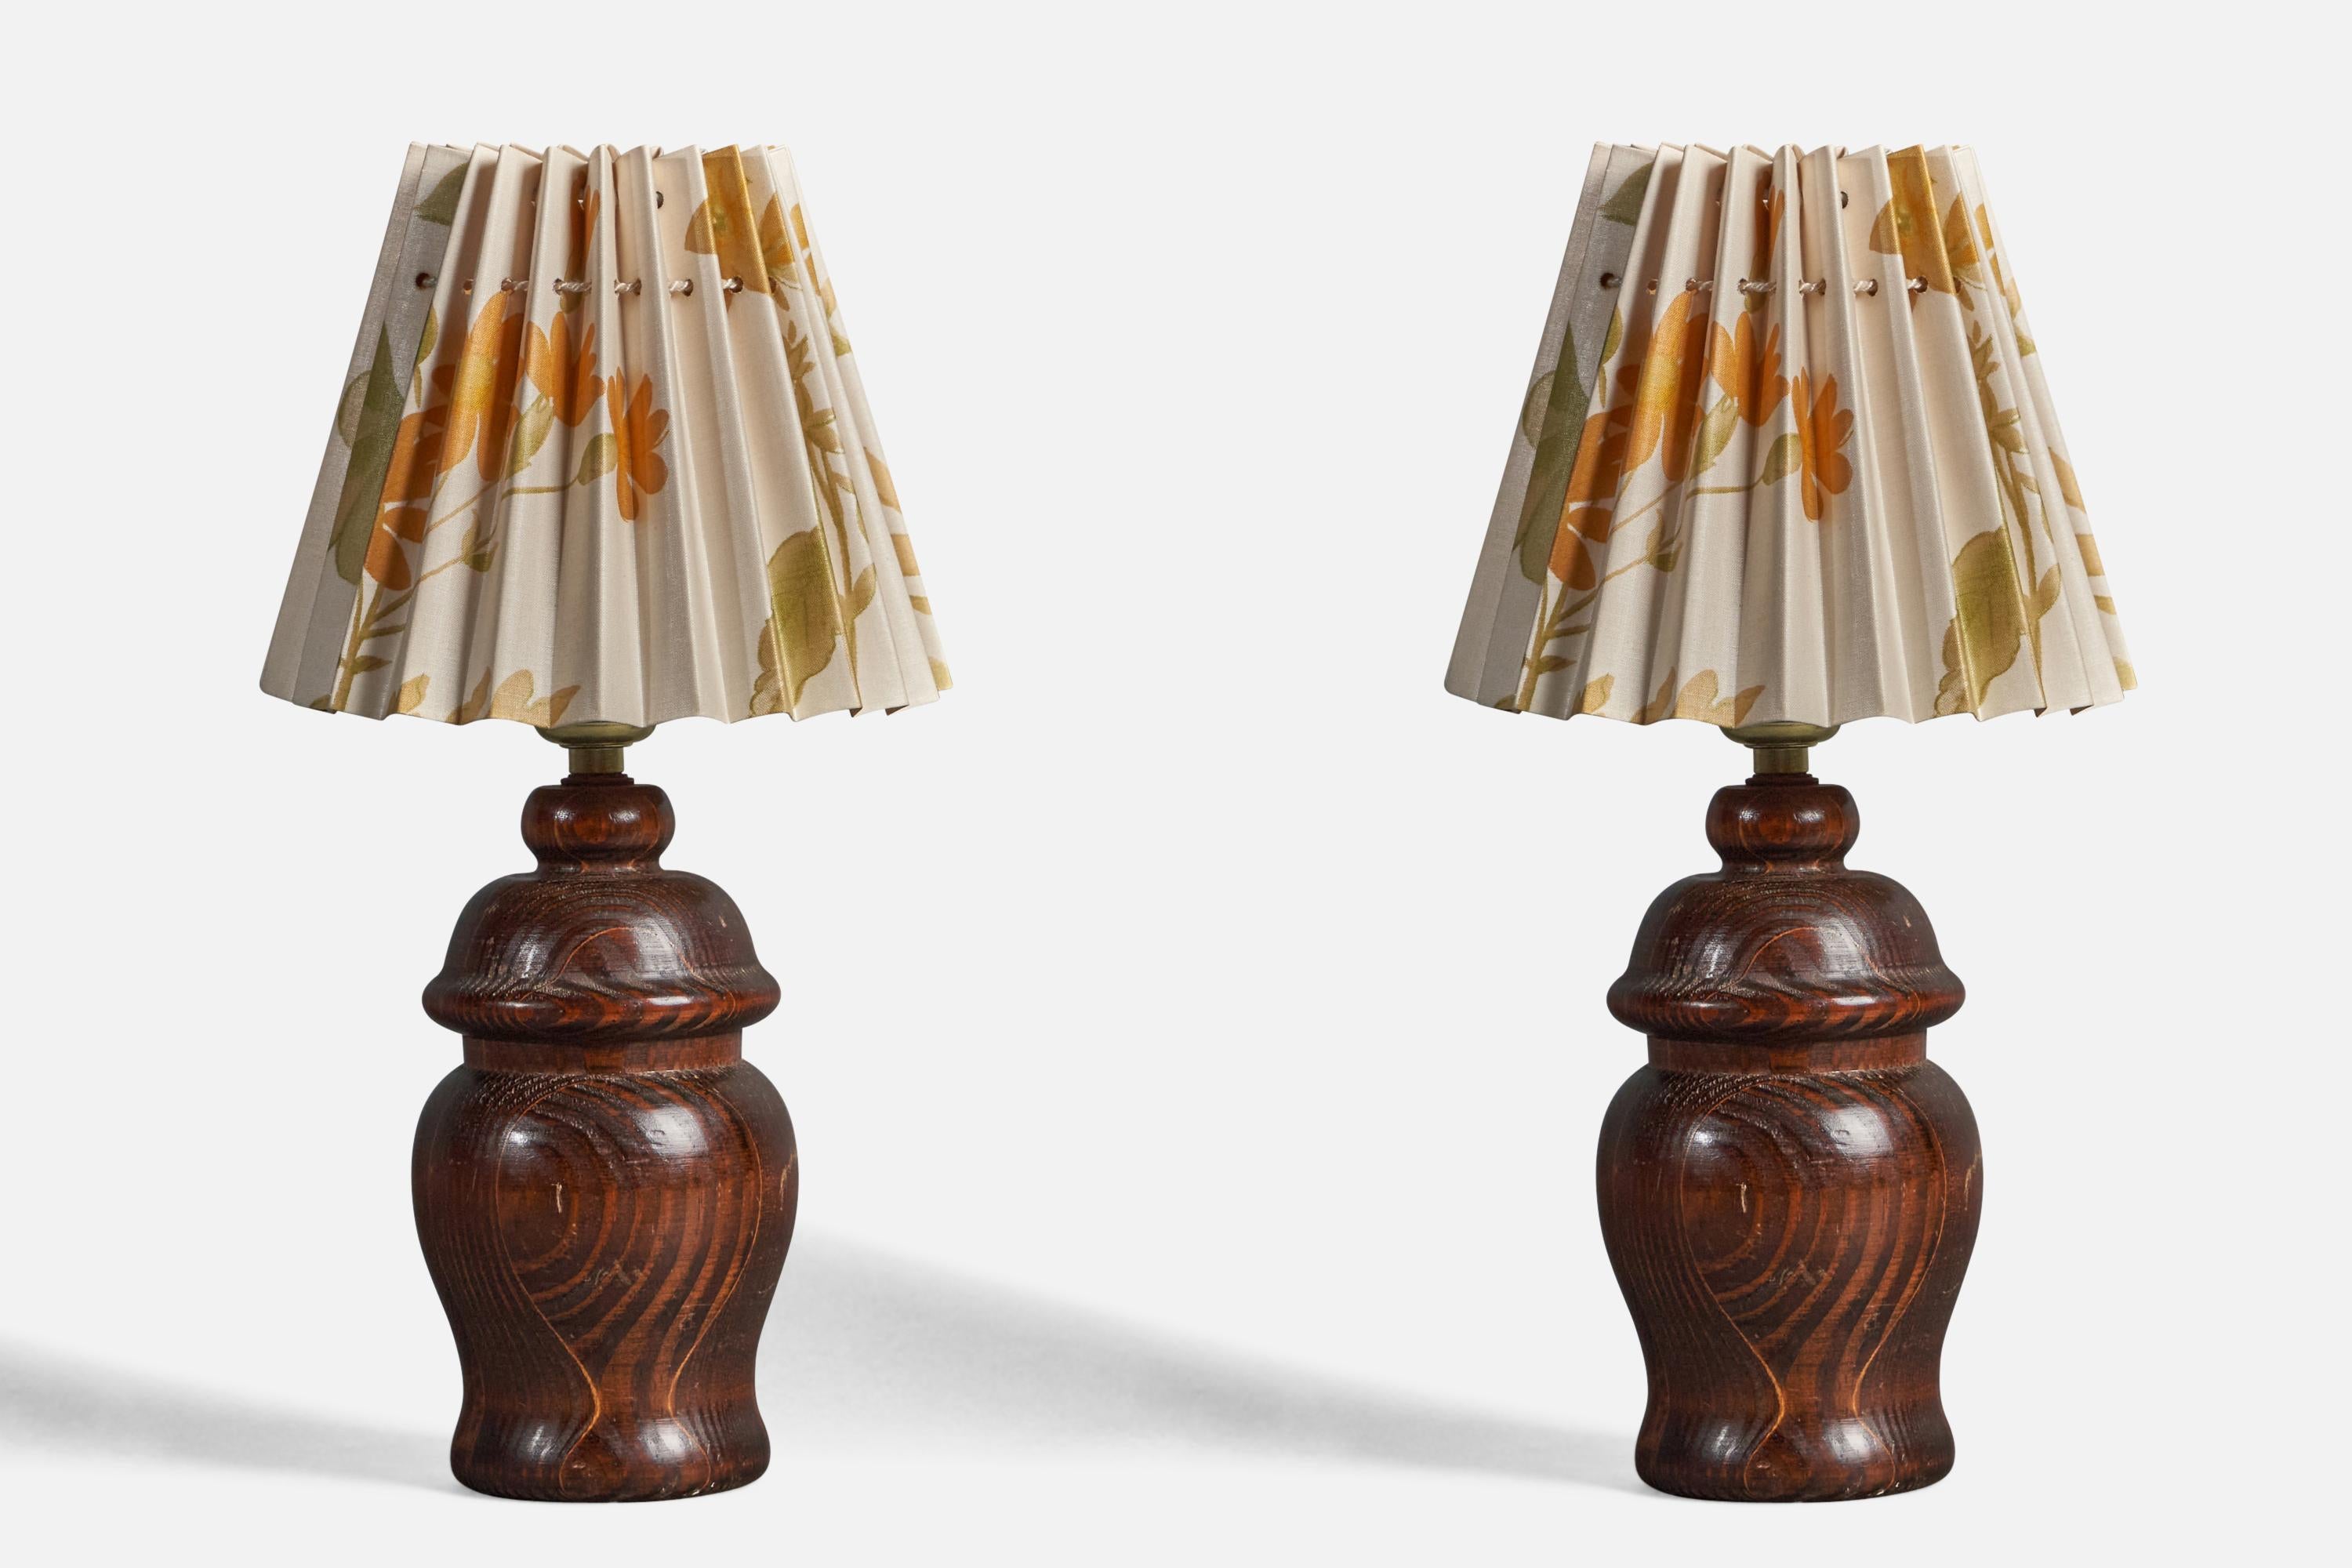 Mid-20th Century American Craft, Freeform Table Lamps, Stained Pine, America, 1960s For Sale